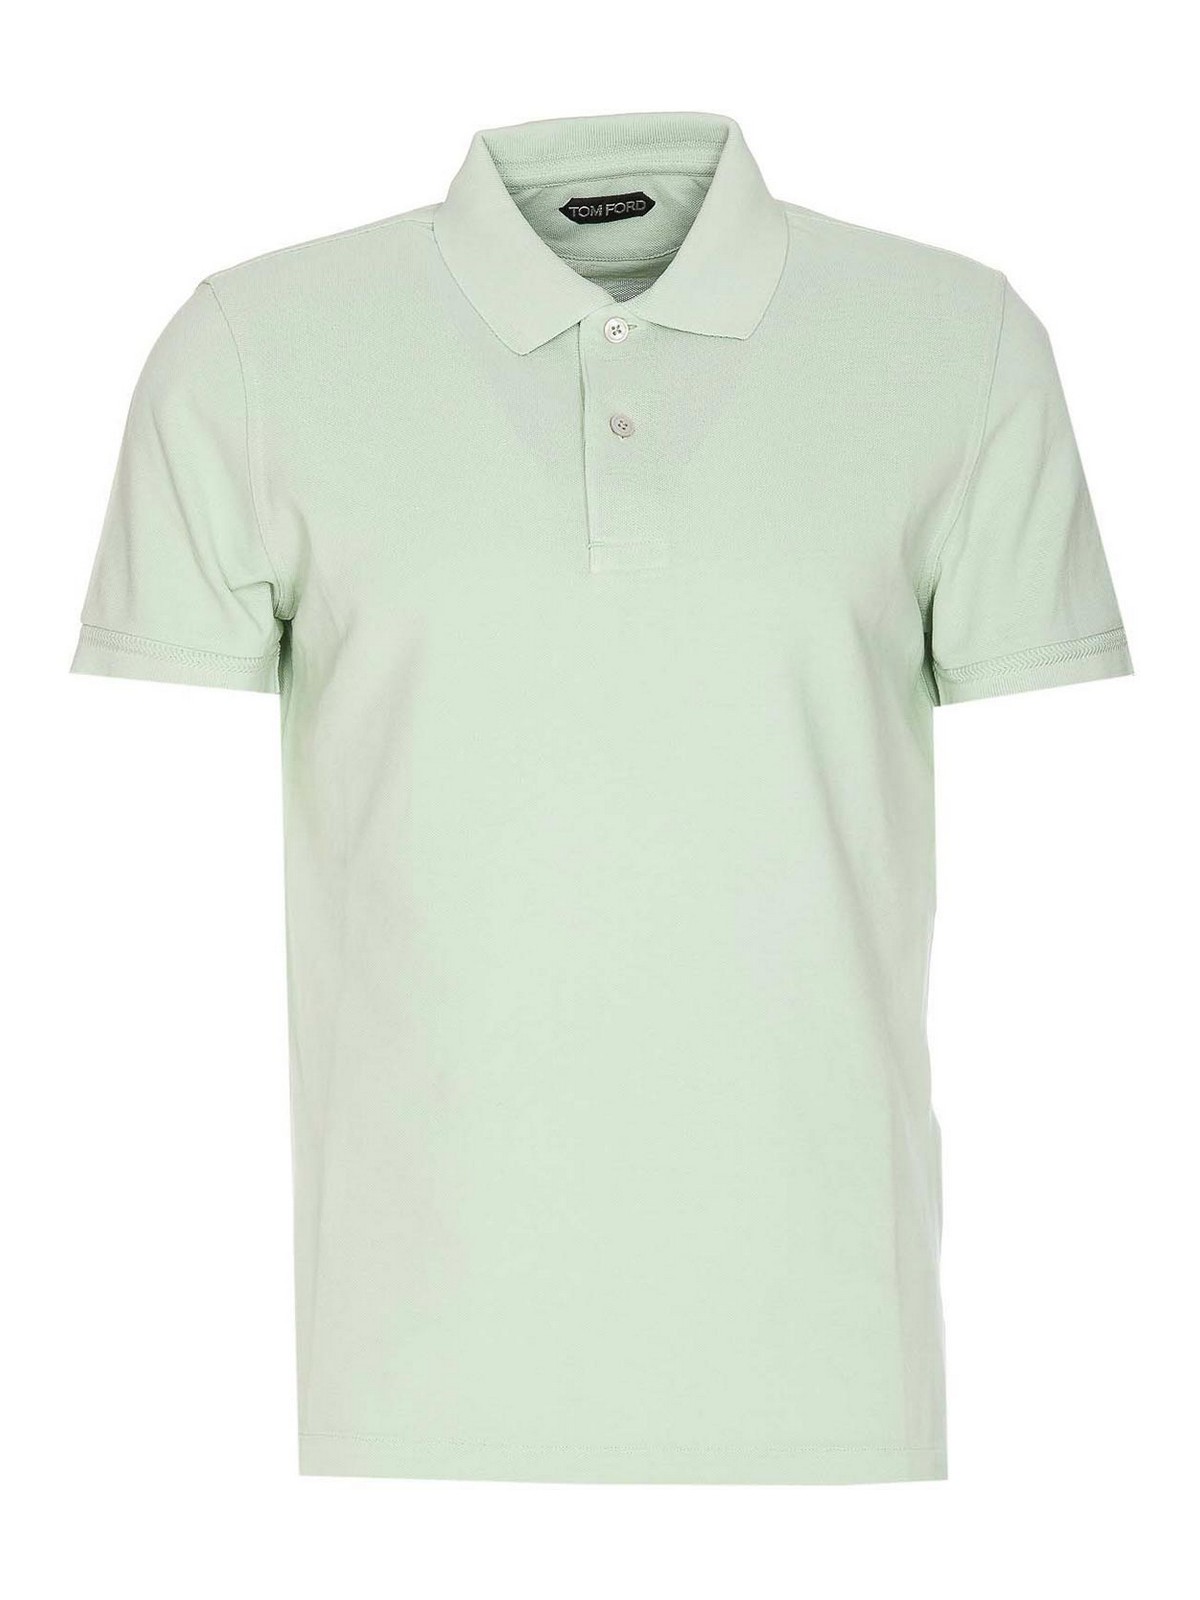 Tom Ford Pale Mint Green Polo Regular Collar